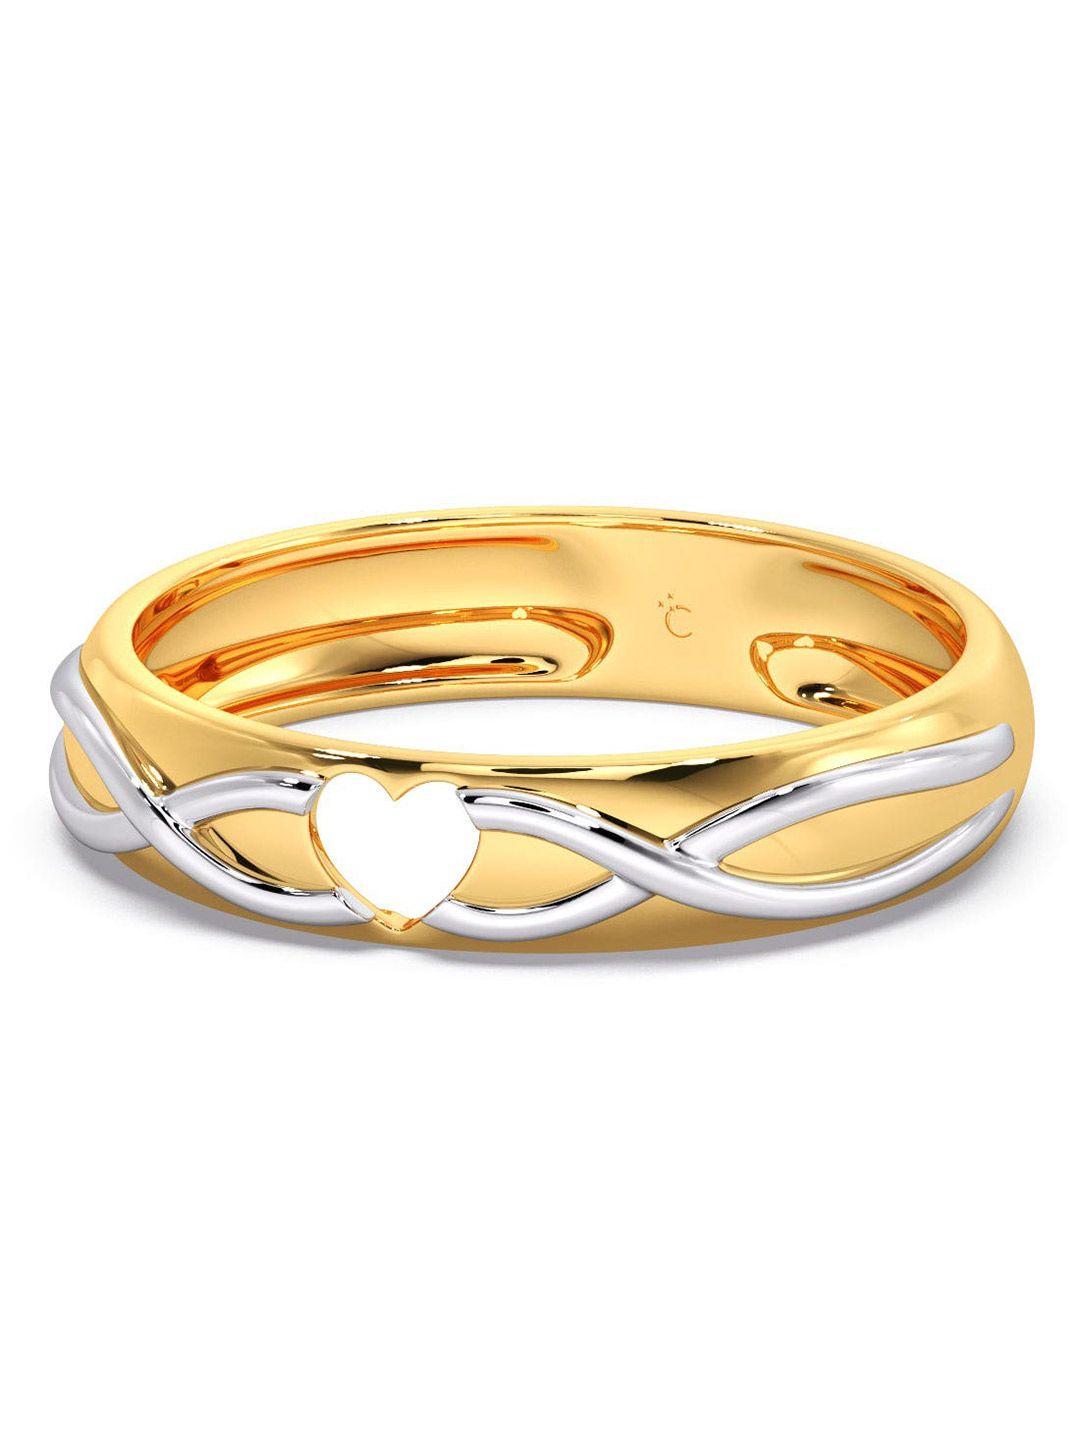 candere a kalyan jewellers company 14kt gold heart band ring-2.91gm